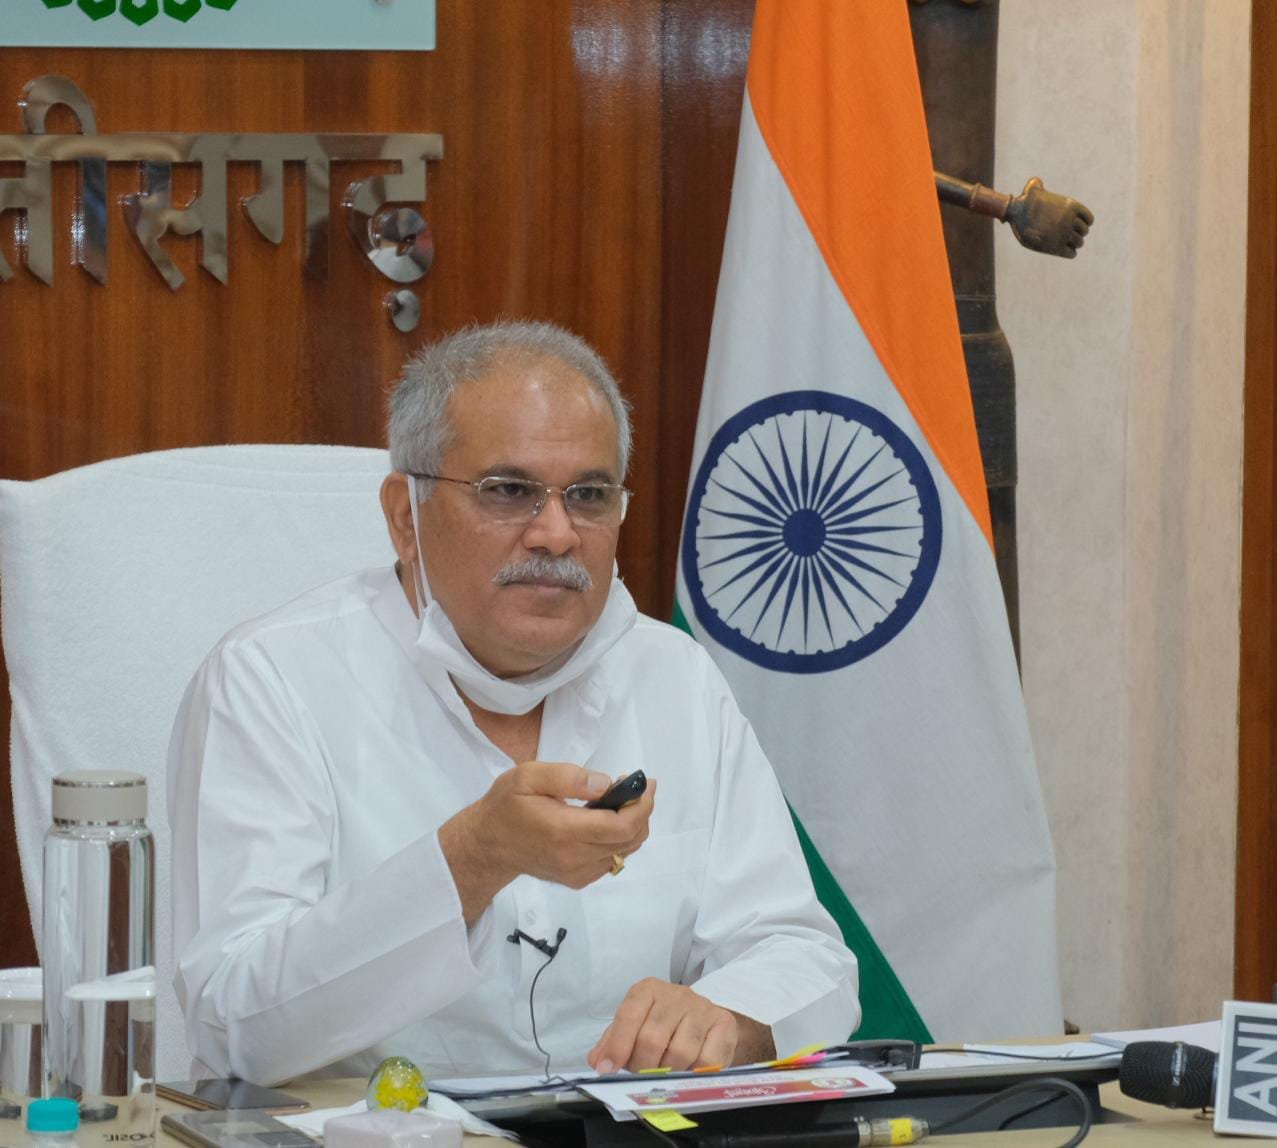 Chief Minister Bhupesh Baghel gave development works worth Rs 3 thousand 854 crore to 12 districts in 6 days